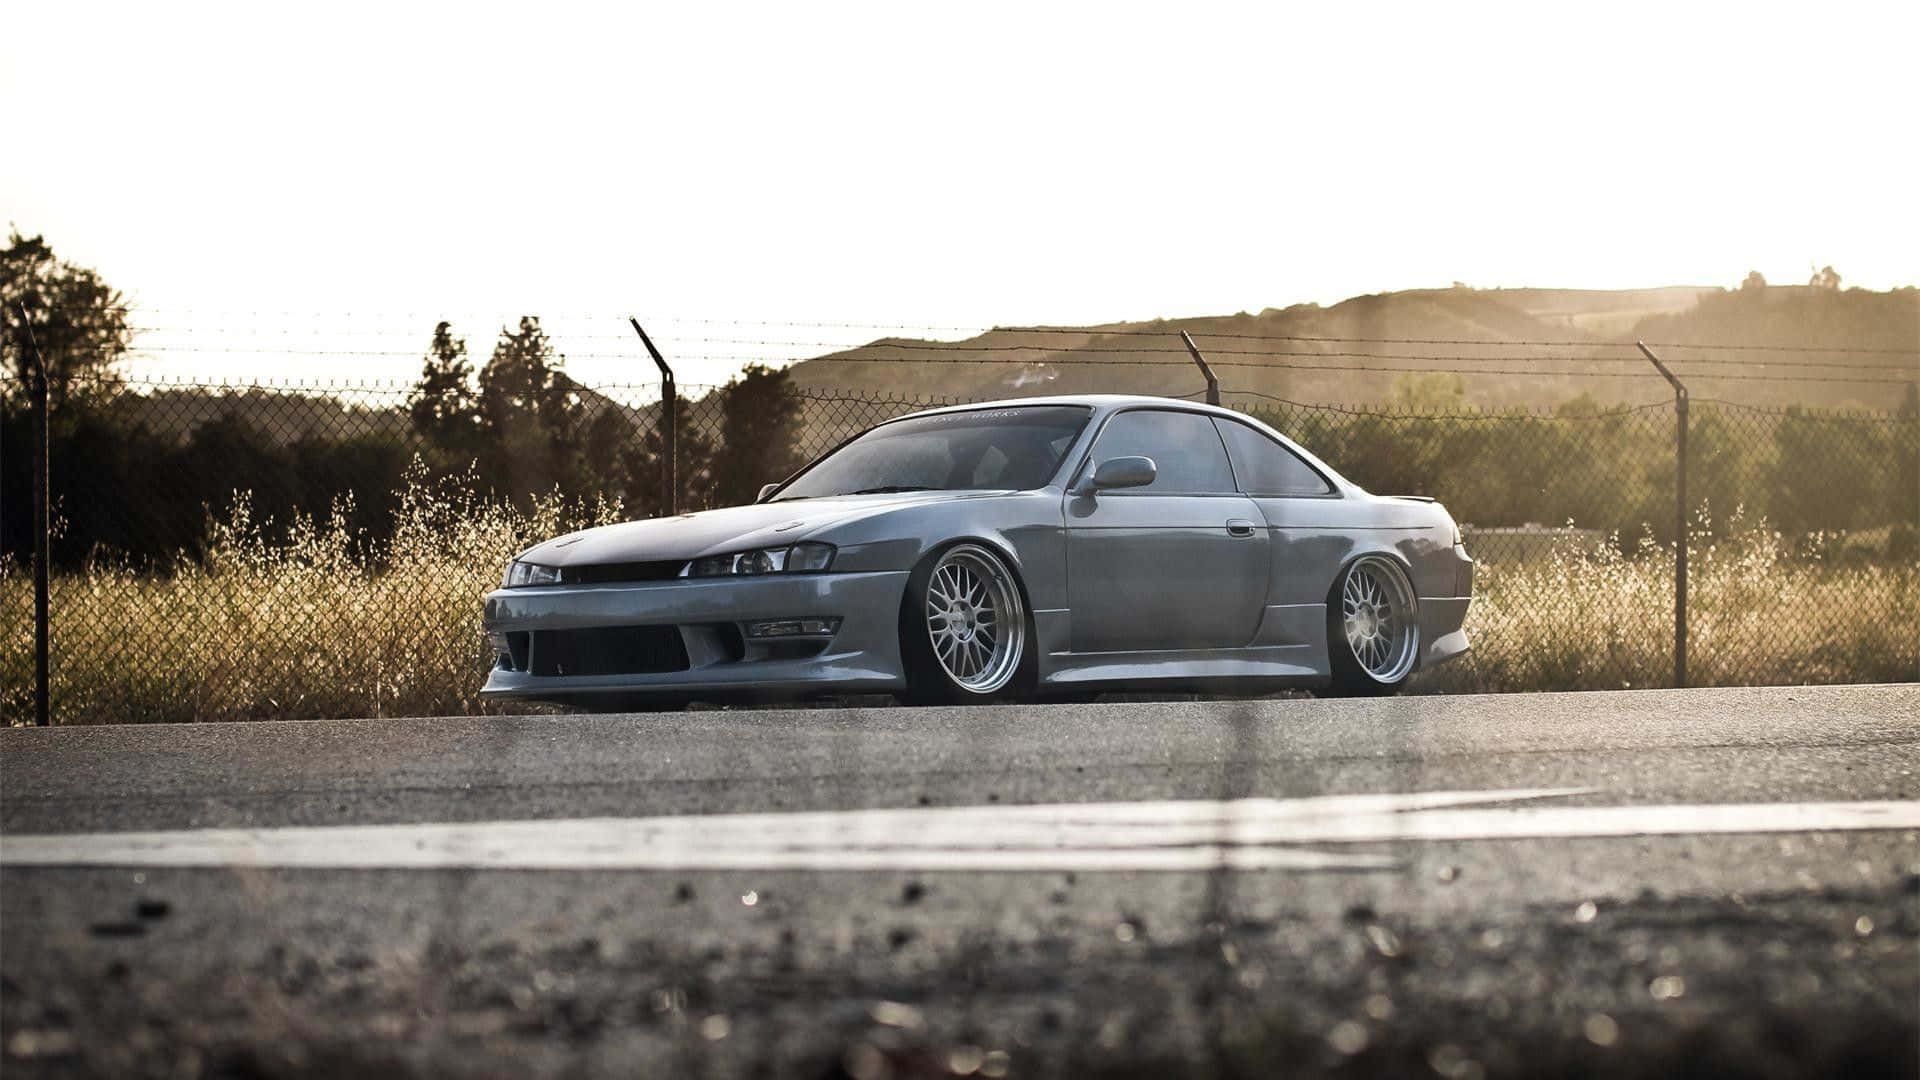 Power and Performance - Nissan Silvia S13 Wallpaper